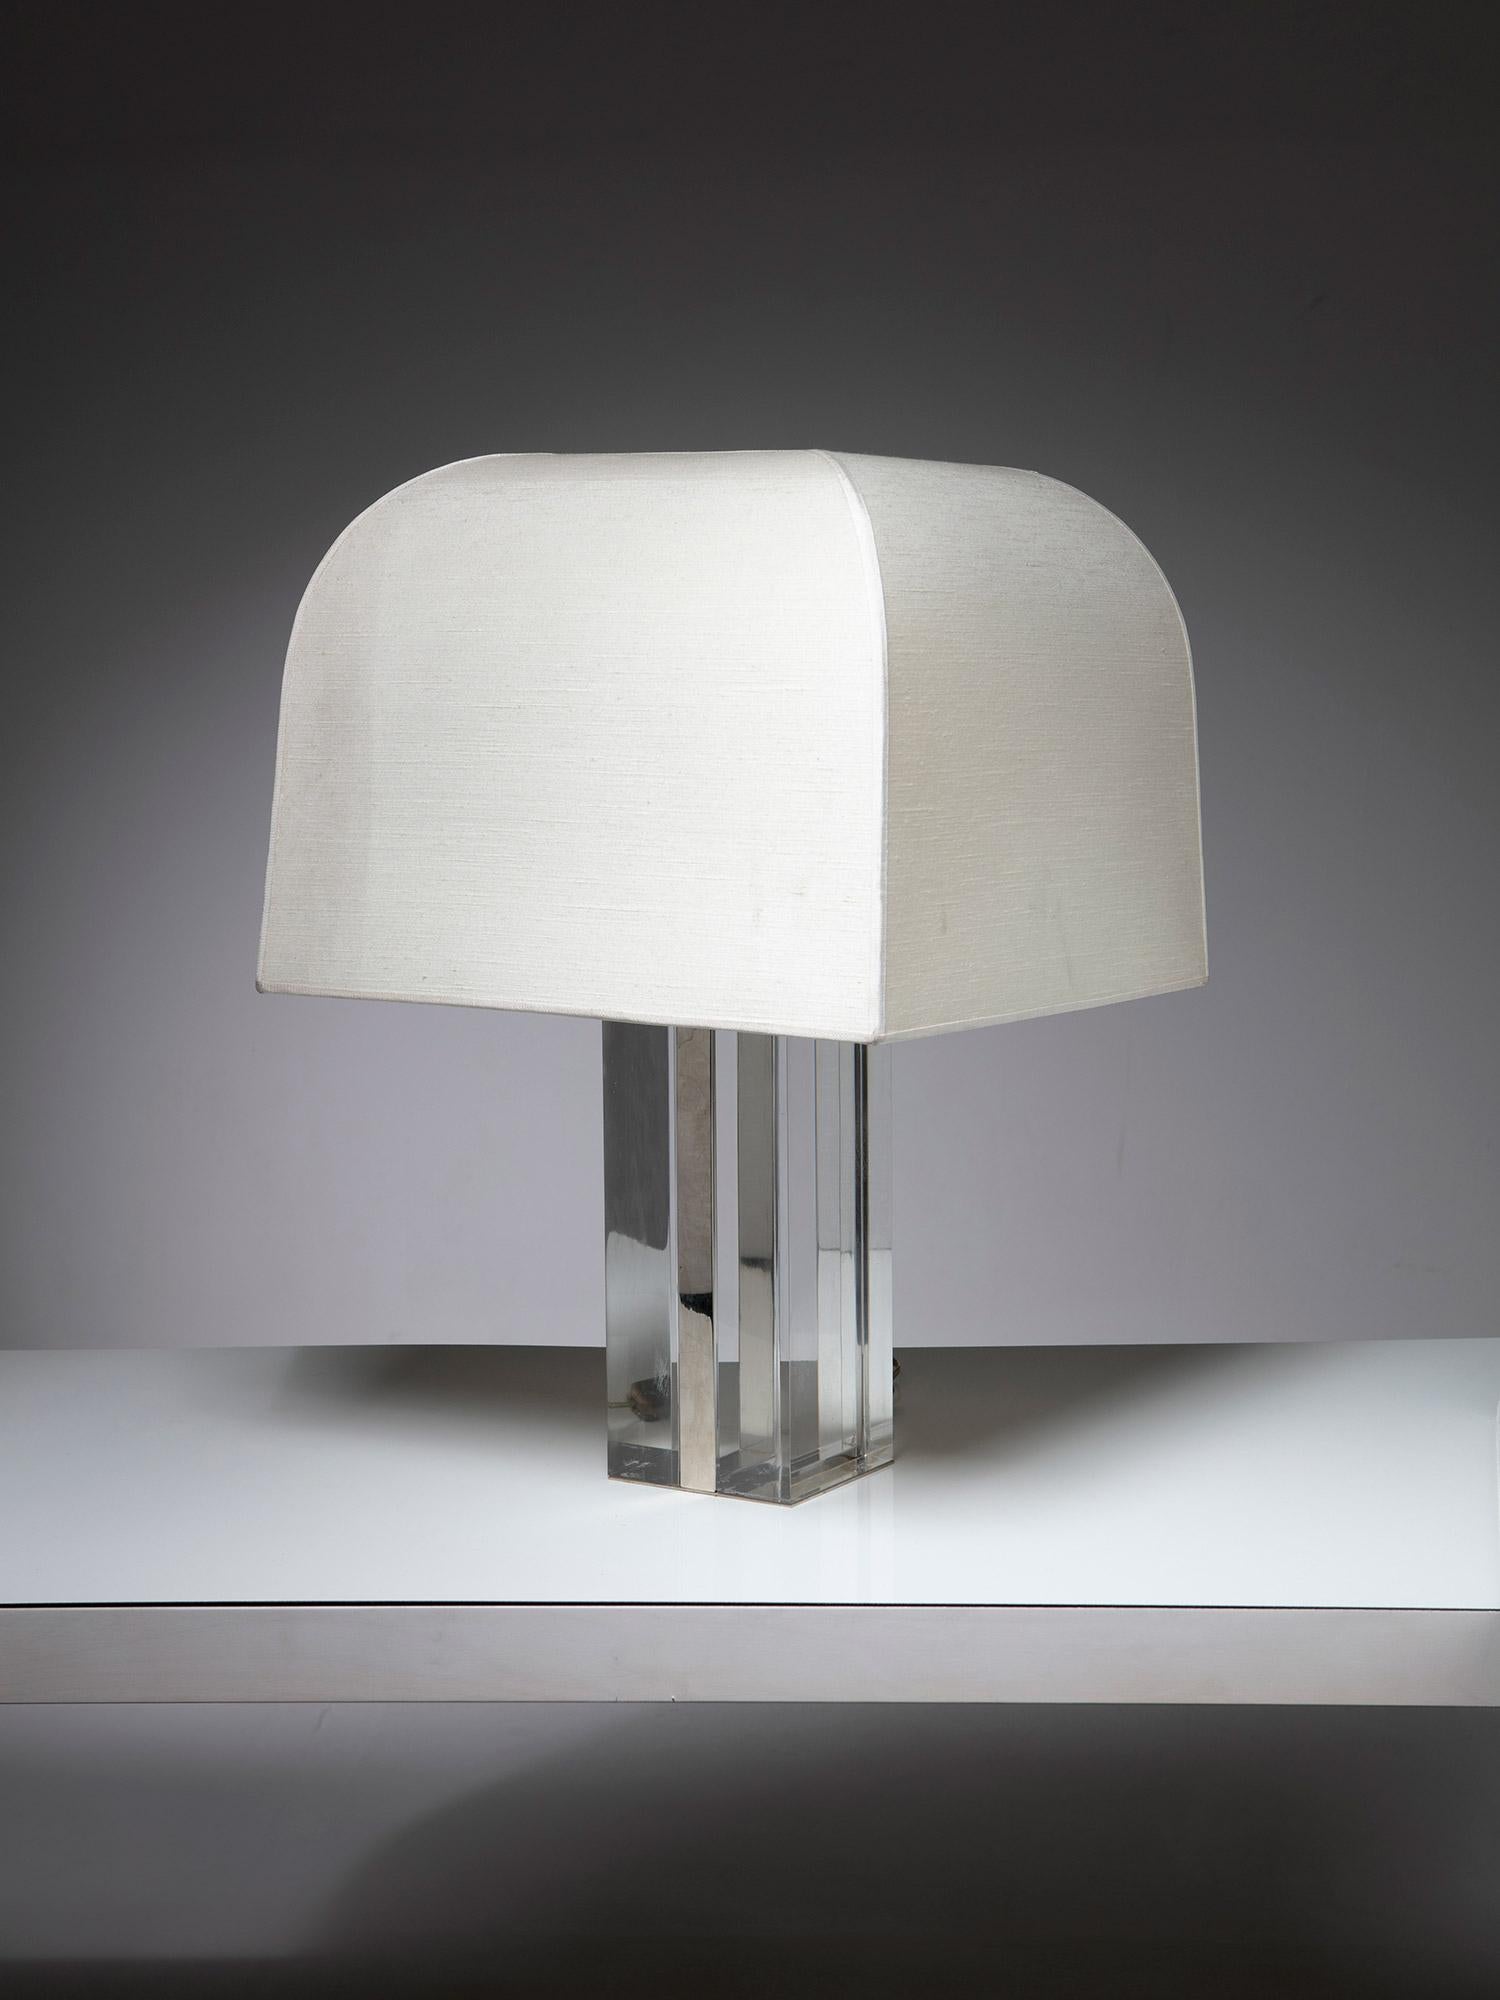 Italian 1960s table lamp.
Large solid plexiglass base with chrome details and original textile shade.